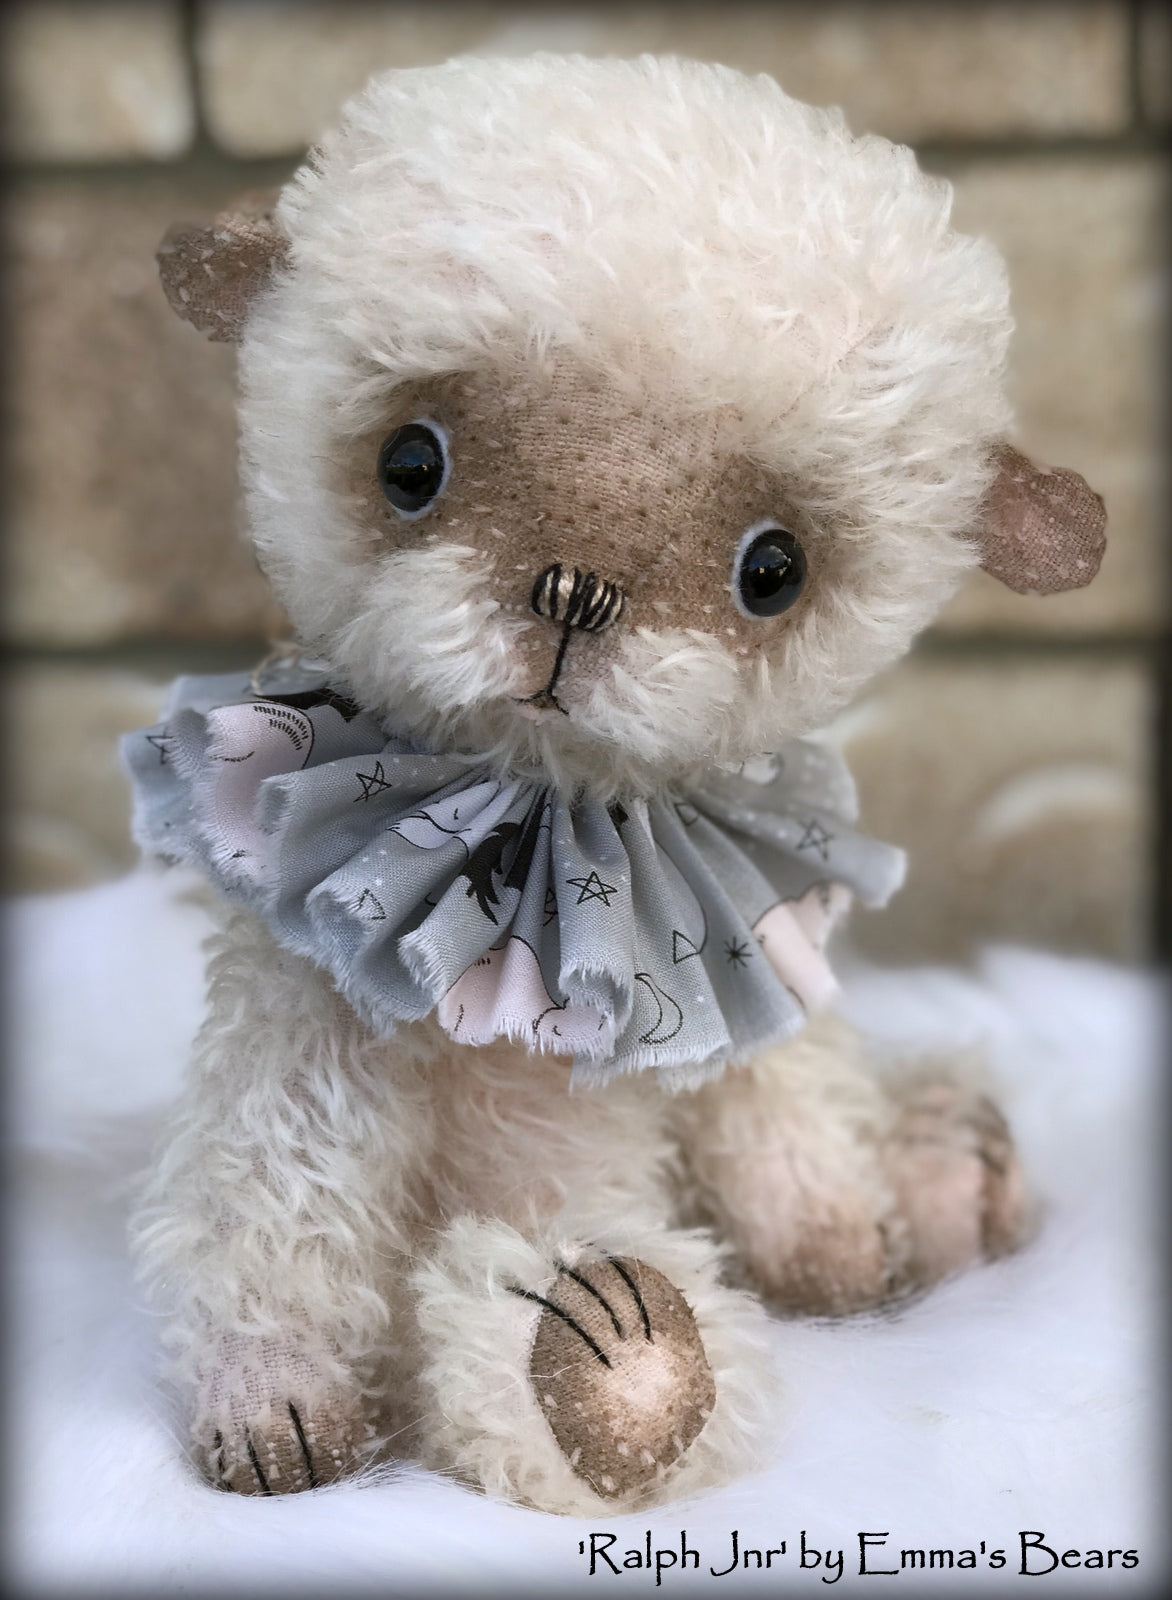 Ralph Jnr - 11" hand-dyed double thick mohair Artist Bear by Emma's Bears - Limited Edition